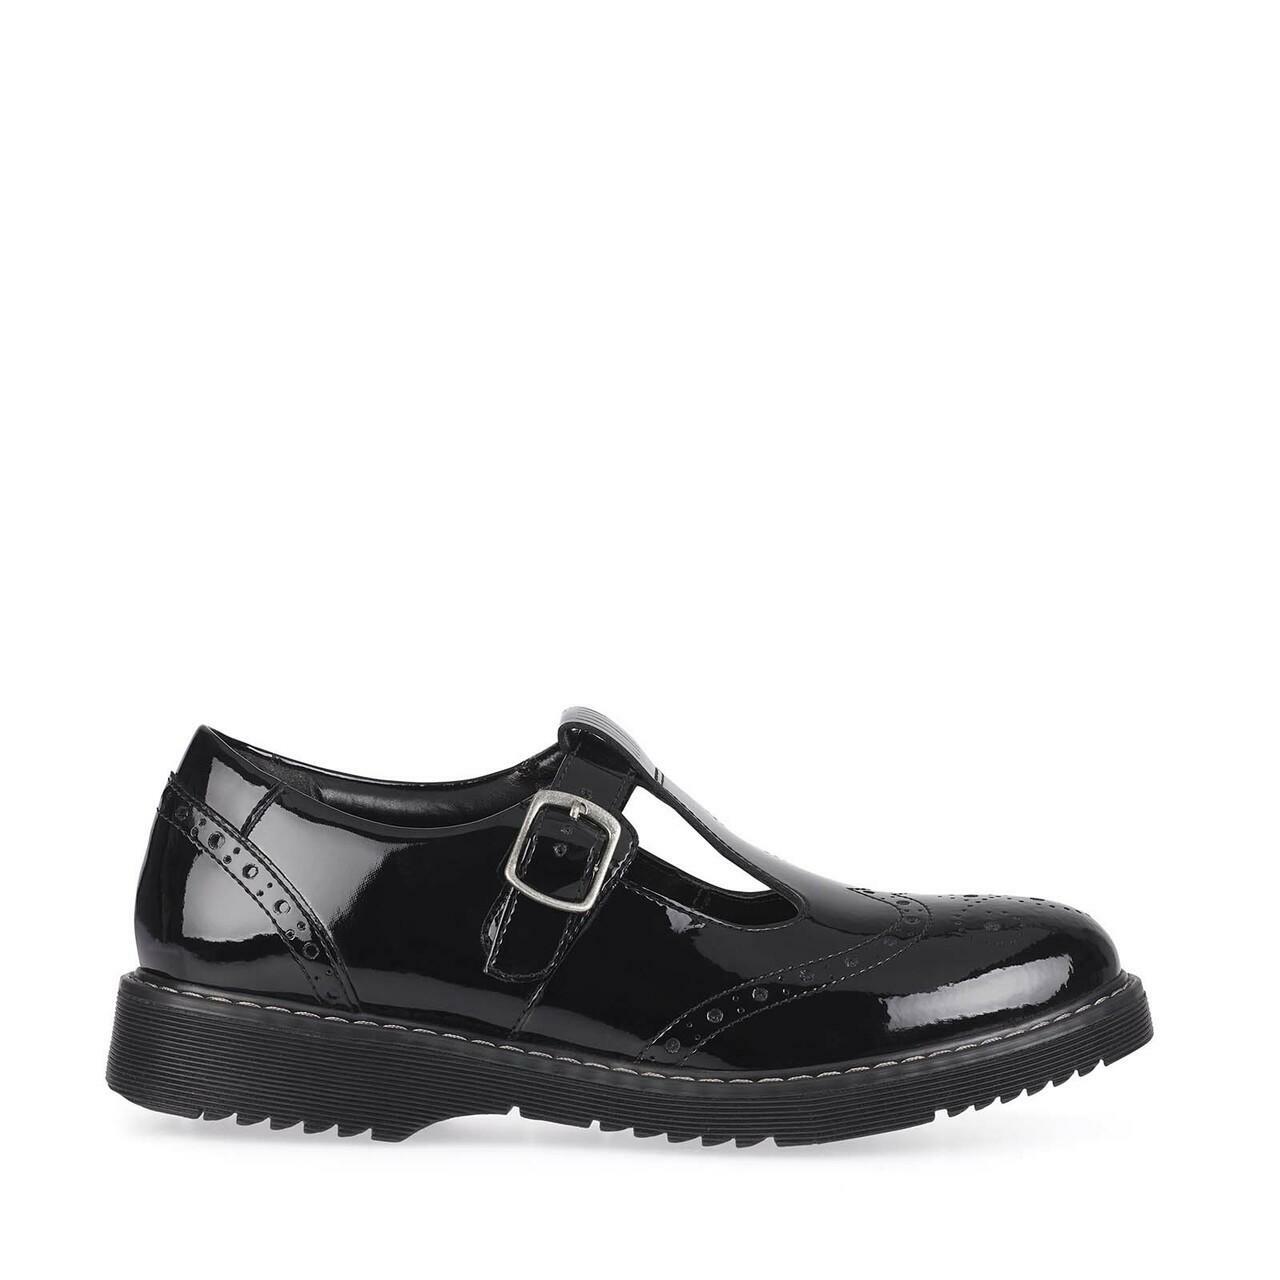 A girls T-Bar school shoe by Start Rite,style Imagine, in black patent with buckle fastening. Right side view.